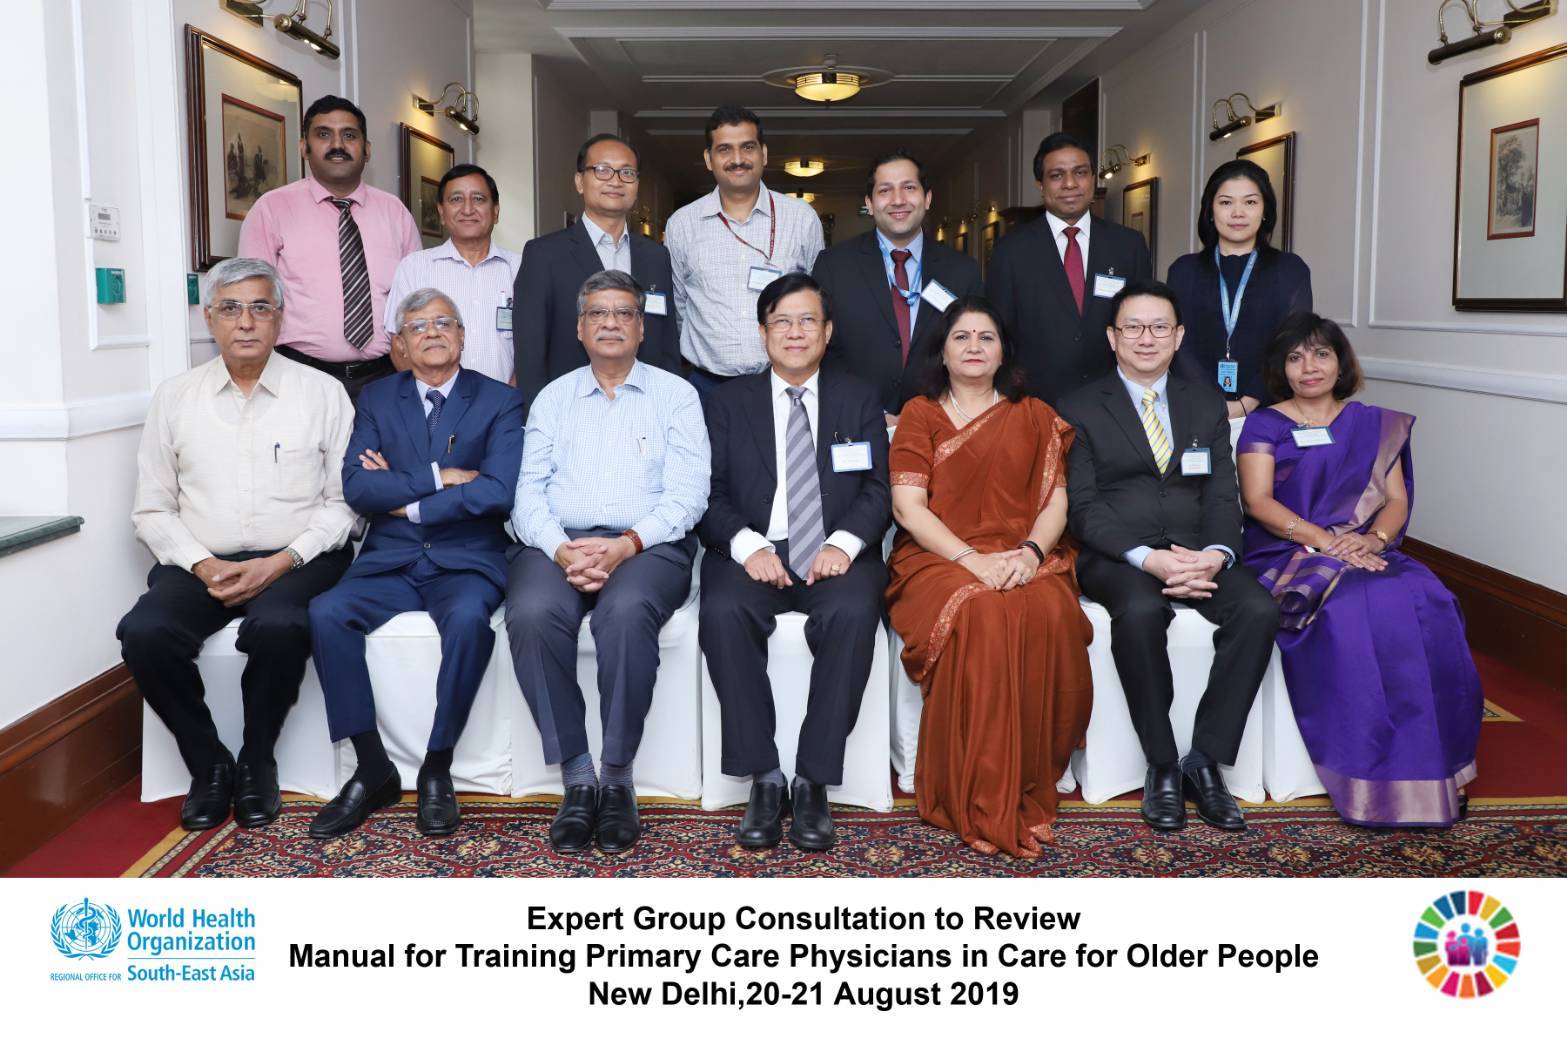 Siriraj Faculty Attended the  Expert Group Consultation to Review Manual for Training Primary Care Physicians in Care for Older People